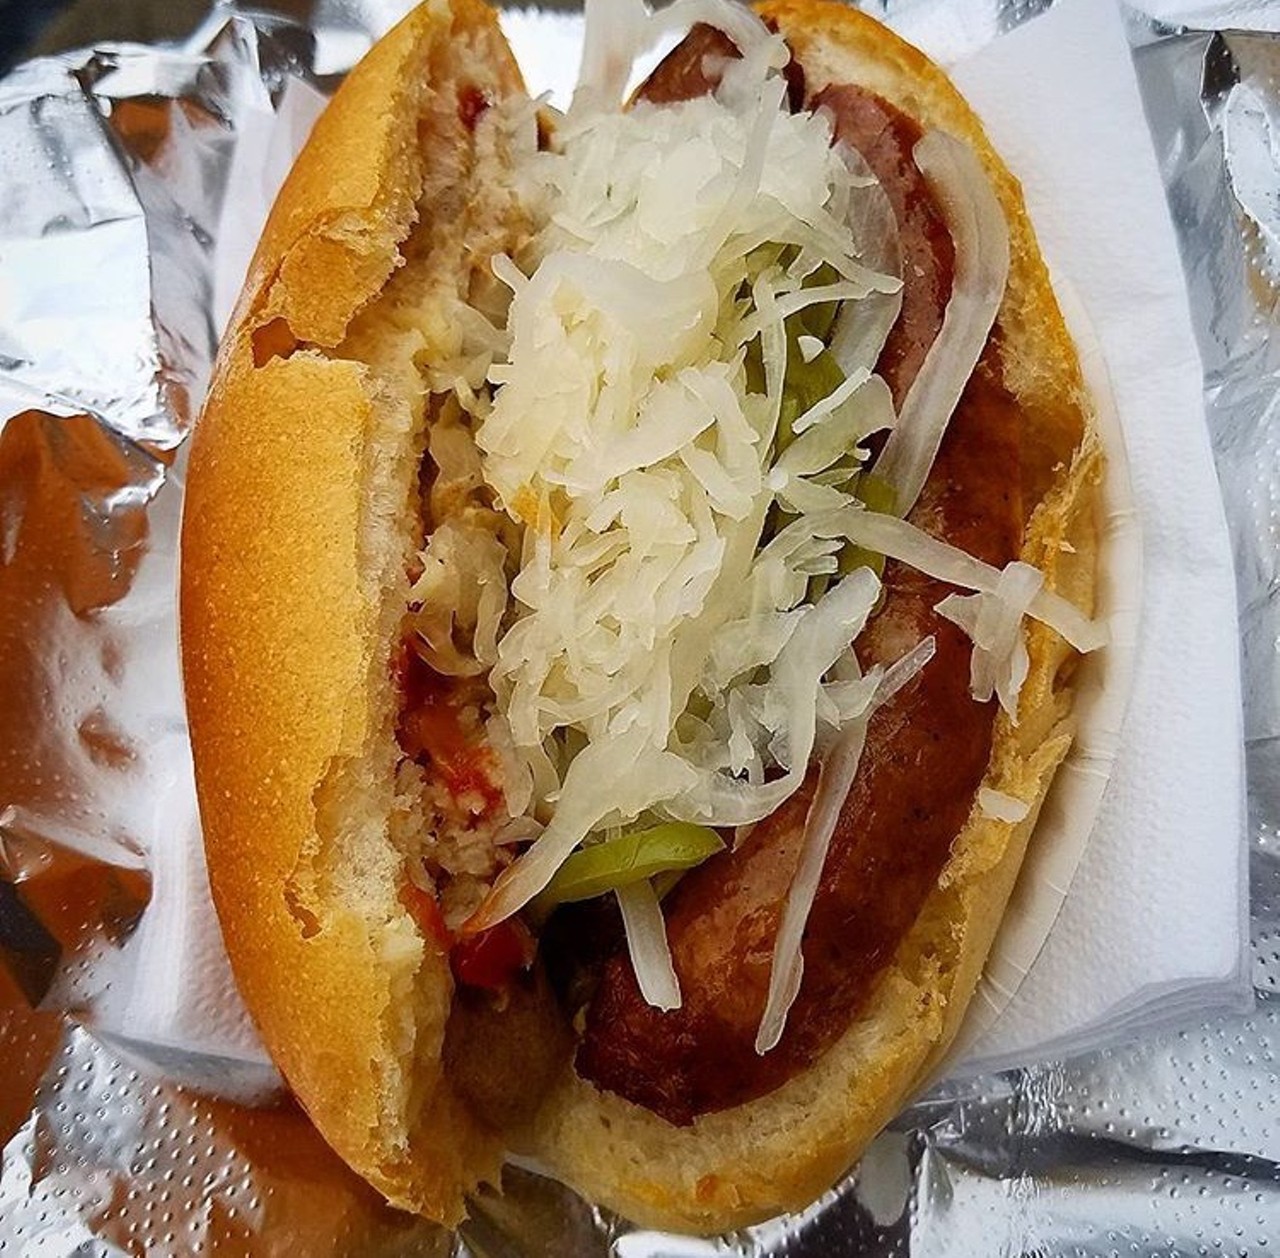 Frank&#146;s Bratwurst
1979 W 25th St
Frank&#146;s bratwurst is derived from a secret recipe that has been served to the public for the last 43 years. The bratwurst stand can be found right inside the West Side Market.
Photo via Pew_216/Instagram